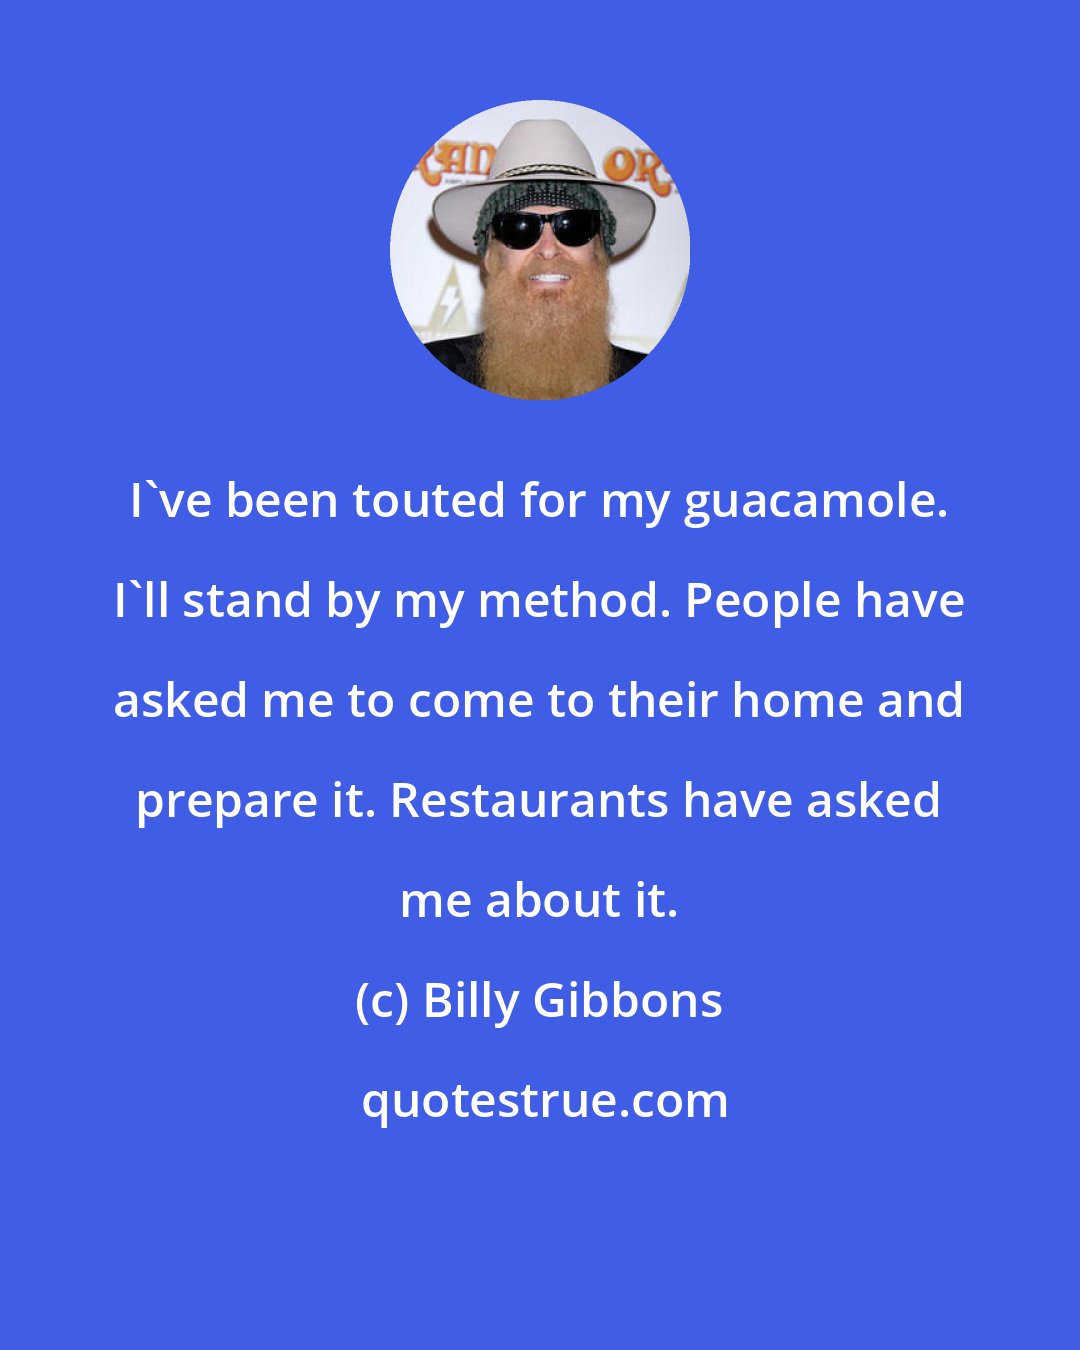 Billy Gibbons: I've been touted for my guacamole. I'll stand by my method. People have asked me to come to their home and prepare it. Restaurants have asked me about it.